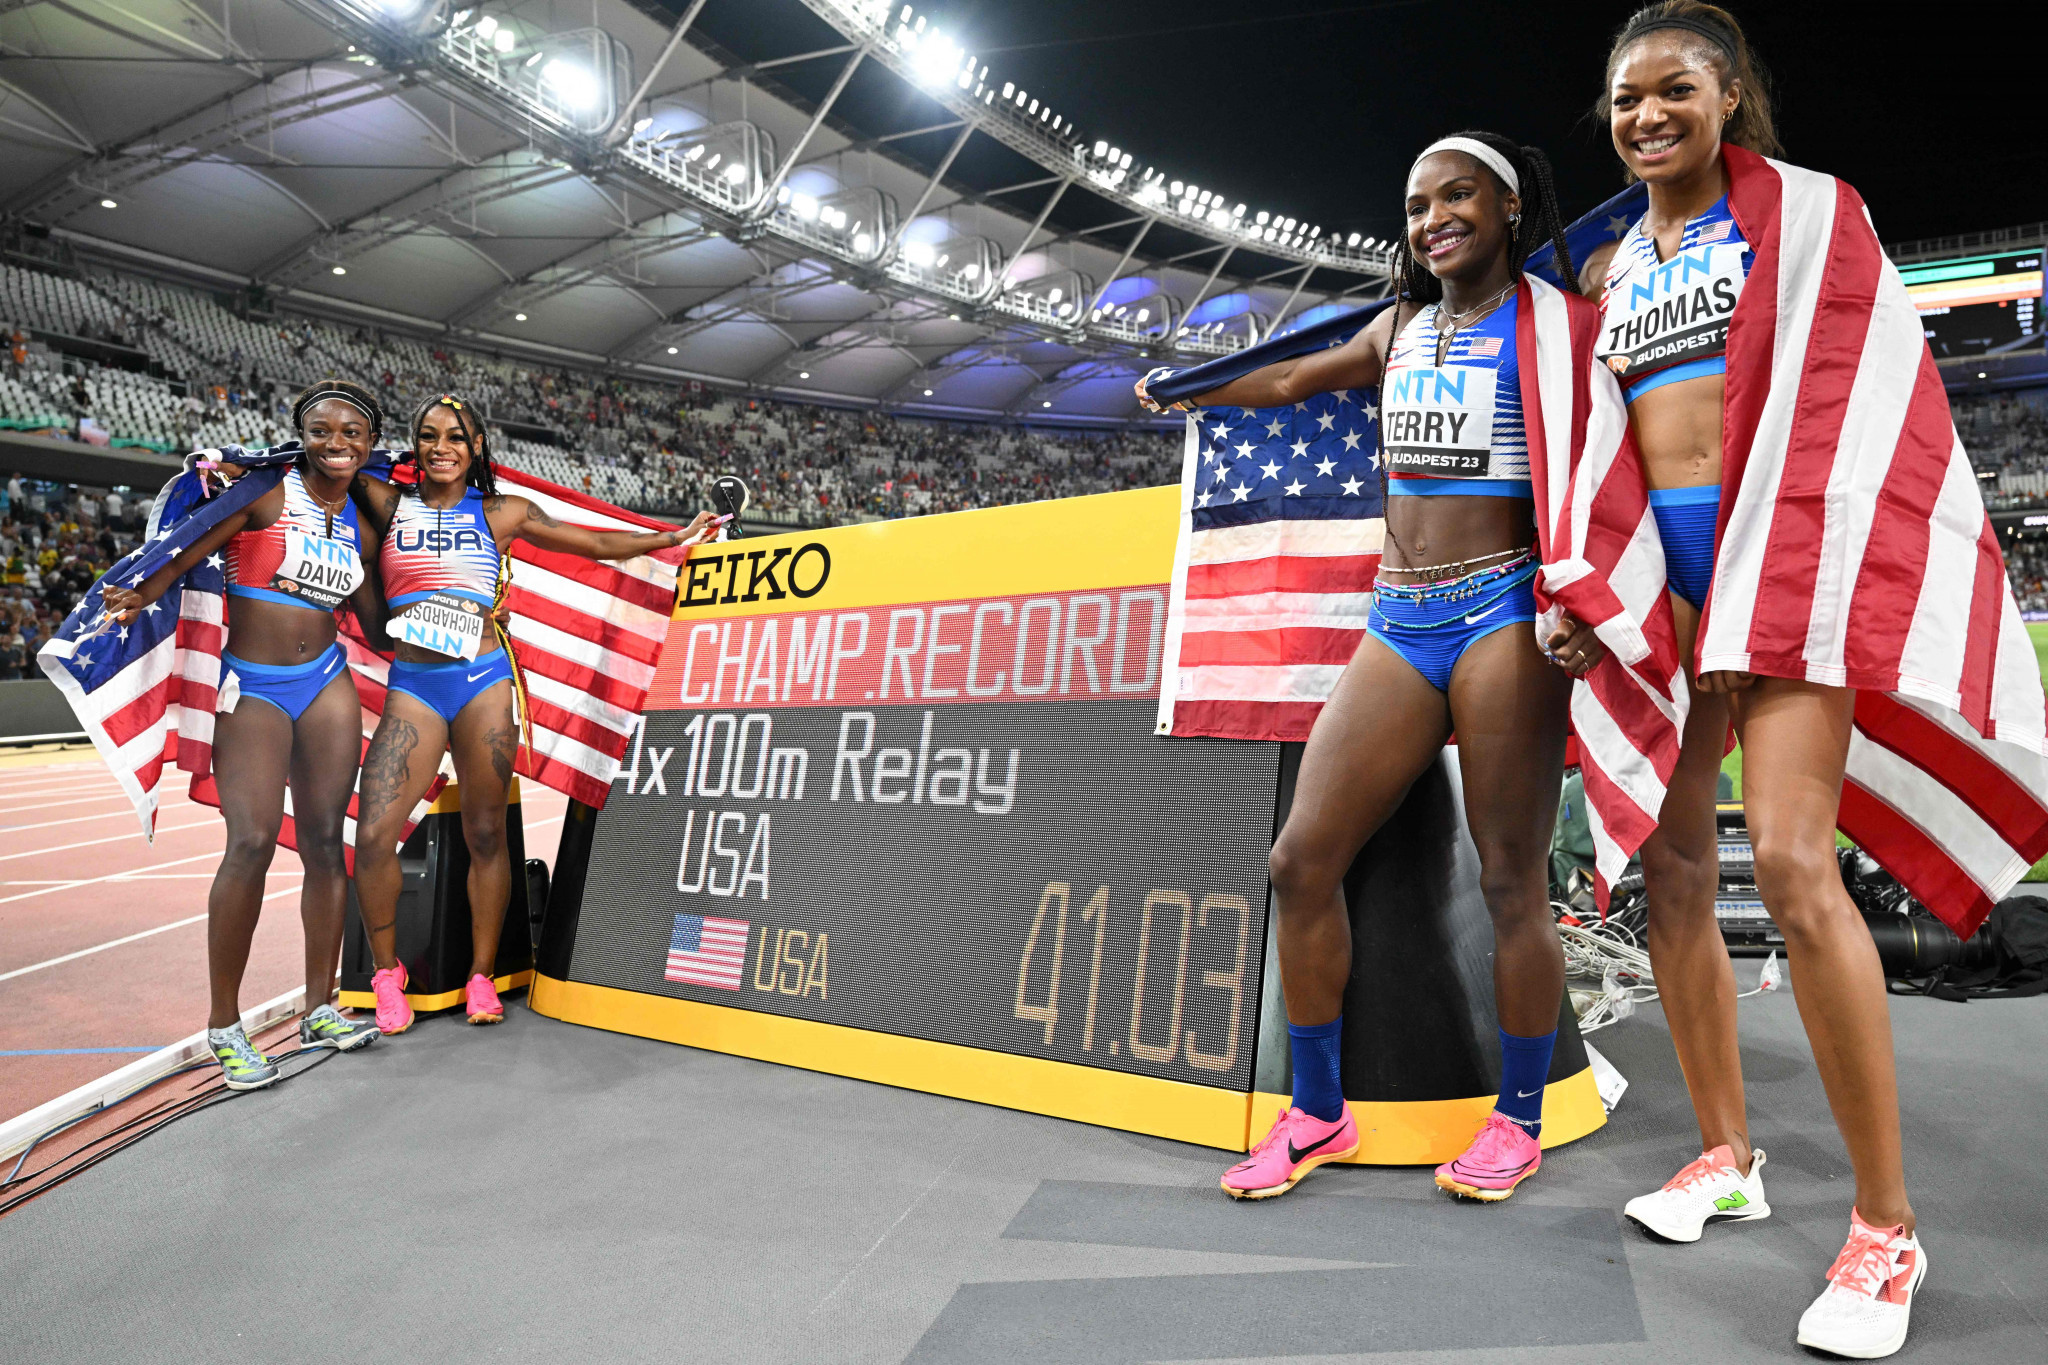 The US doubled up in the 4x100m relays by winning the women's race in Championships record time of 41.03 ©Getty Images